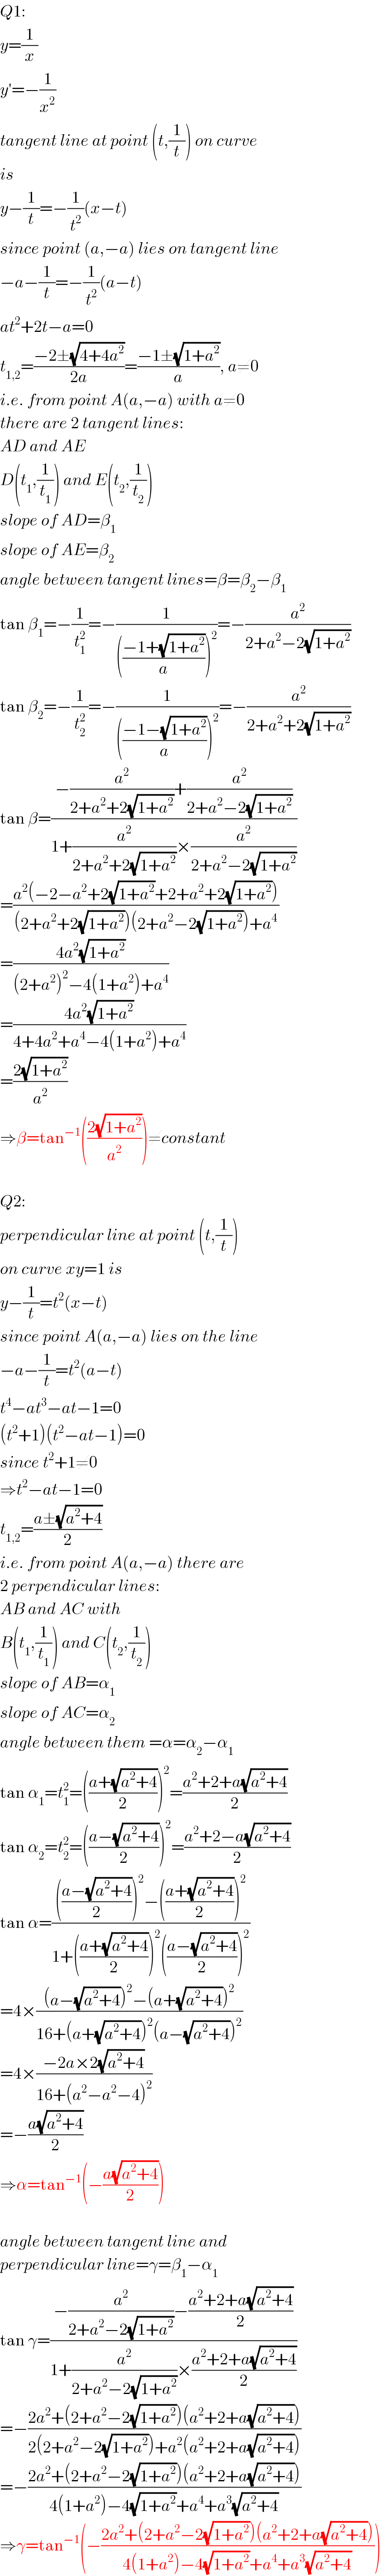 Q1:  y=(1/x)  y′=−(1/x^2 )  tangent line at point (t,(1/t)) on curve  is  y−(1/t)=−(1/t^2 )(x−t)  since point (a,−a) lies on tangent line  −a−(1/t)=−(1/t^2 )(a−t)  at^2 +2t−a=0  t_(1,2) =((−2±(√(4+4a^2 )))/(2a))=((−1±(√(1+a^2 )))/a), a≠0  i.e. from point A(a,−a) with a≠0  there are 2 tangent lines:  AD and AE  D(t_1 ,(1/t_1 )) and E(t_2 ,(1/t_2 ))  slope of AD=β_1   slope of AE=β_2   angle between tangent lines=β=β_2 −β_1   tan β_1 =−(1/t_1 ^2 )=−(1/((((−1+(√(1+a^2 )))/a))^2 ))=−(a^2 /(2+a^2 −2(√(1+a^2 ))))  tan β_2 =−(1/t_2 ^2 )=−(1/((((−1−(√(1+a^2 )))/a))^2 ))=−(a^2 /(2+a^2 +2(√(1+a^2 ))))  tan β=((−(a^2 /(2+a^2 +2(√(1+a^2 ))))+(a^2 /(2+a^2 −2(√(1+a^2 )))))/(1+(a^2 /(2+a^2 +2(√(1+a^2 ))))×(a^2 /(2+a^2 −2(√(1+a^2 ))))))  =((a^2 (−2−a^2 +2(√(1+a^2 ))+2+a^2 +2(√(1+a^2 ))))/((2+a^2 +2(√(1+a^2 )))(2+a^2 −2(√(1+a^2 )))+a^4 ))  =((4a^2 (√(1+a^2 )))/((2+a^2 )^2 −4(1+a^2 )+a^4 ))  =((4a^2 (√(1+a^2 )))/(4+4a^2 +a^4 −4(1+a^2 )+a^4 ))  =((2(√(1+a^2 )))/a^2 )  ⇒β=tan^(−1) (((2(√(1+a^2 )))/a^2 ))≠constant    Q2:  perpendicular line at point (t,(1/t))  on curve xy=1 is  y−(1/t)=t^2 (x−t)  since point A(a,−a) lies on the line  −a−(1/t)=t^2 (a−t)  t^4 −at^3 −at−1=0  (t^2 +1)(t^2 −at−1)=0  since t^2 +1≠0  ⇒t^2 −at−1=0  t_(1,2) =((a±(√(a^2 +4)))/2)  i.e. from point A(a,−a) there are  2 perpendicular lines:  AB and AC with  B(t_1 ,(1/t_1 )) and C(t_2 ,(1/t_2 ))  slope of AB=α_1   slope of AC=α_2   angle between them =α=α_2 −α_1   tan α_1 =t_1 ^2 =(((a+(√(a^2 +4)))/2))^2 =((a^2 +2+a(√(a^2 +4)))/2)  tan α_2 =t_2 ^2 =(((a−(√(a^2 +4)))/2))^2 =((a^2 +2−a(√(a^2 +4)))/2)  tan α=(((((a−(√(a^2 +4)))/2))^2 −(((a+(√(a^2 +4)))/2))^2 )/(1+(((a+(√(a^2 +4)))/2))^2 (((a−(√(a^2 +4)))/2))^2 ))  =4×(((a−(√(a^2 +4)))^2 −(a+(√(a^2 +4)))^2 )/(16+(a+(√(a^2 +4)))^2 (a−(√(a^2 +4)))^2 ))  =4×((−2a×2(√(a^2 +4)))/(16+(a^2 −a^2 −4)^2 ))  =−((a(√(a^2 +4)))/2)  ⇒α=tan^(−1) (−((a(√(a^2 +4)))/2))    angle between tangent line and  perpendicular line=γ=β_1 −α_1   tan γ=((−(a^2 /(2+a^2 −2(√(1+a^2 ))))−((a^2 +2+a(√(a^2 +4)))/2))/(1+(a^2 /(2+a^2 −2(√(1+a^2 ))))×((a^2 +2+a(√(a^2 +4)))/2)))  =−((2a^2 +(2+a^2 −2(√(1+a^2 )))(a^2 +2+a(√(a^2 +4))))/(2(2+a^2 −2(√(1+a^2 )))+a^2 (a^2 +2+a(√(a^2 +4)))))   =−((2a^2 +(2+a^2 −2(√(1+a^2 )))(a^2 +2+a(√(a^2 +4))))/(4(1+a^2 )−4(√(1+a^2 ))+a^4 +a^3 (√(a^2 +4))))   ⇒γ=tan^(−1) (−((2a^2 +(2+a^2 −2(√(1+a^2 )))(a^2 +2+a(√(a^2 +4))))/(4(1+a^2 )−4(√(1+a^2 ))+a^4 +a^3 (√(a^2 +4)))))  